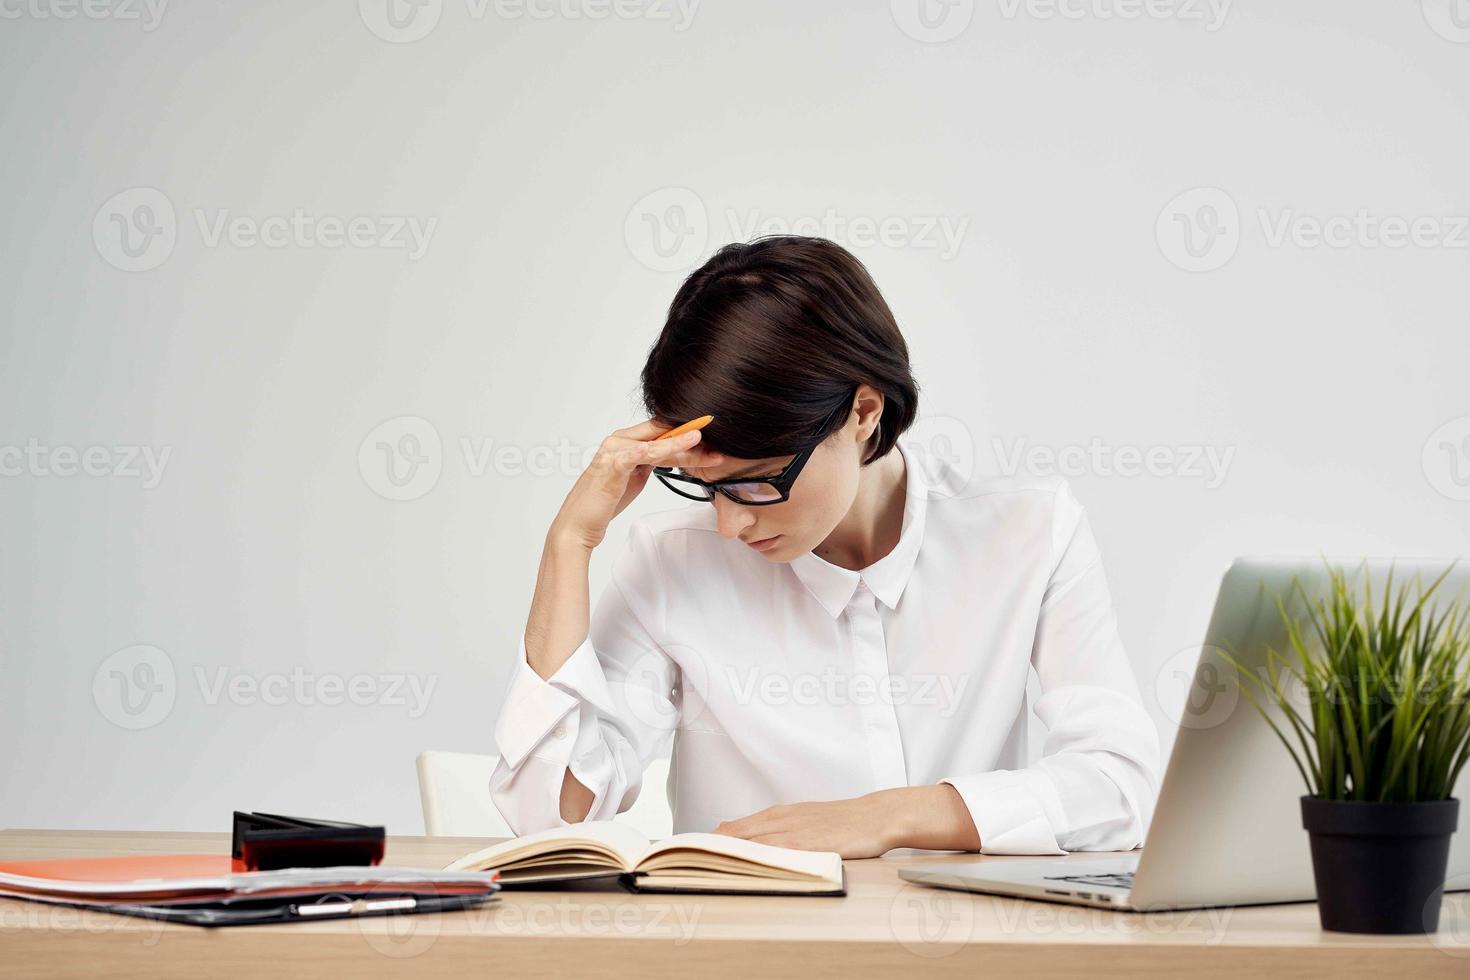 female manager in the office documents Professional Job light background photo